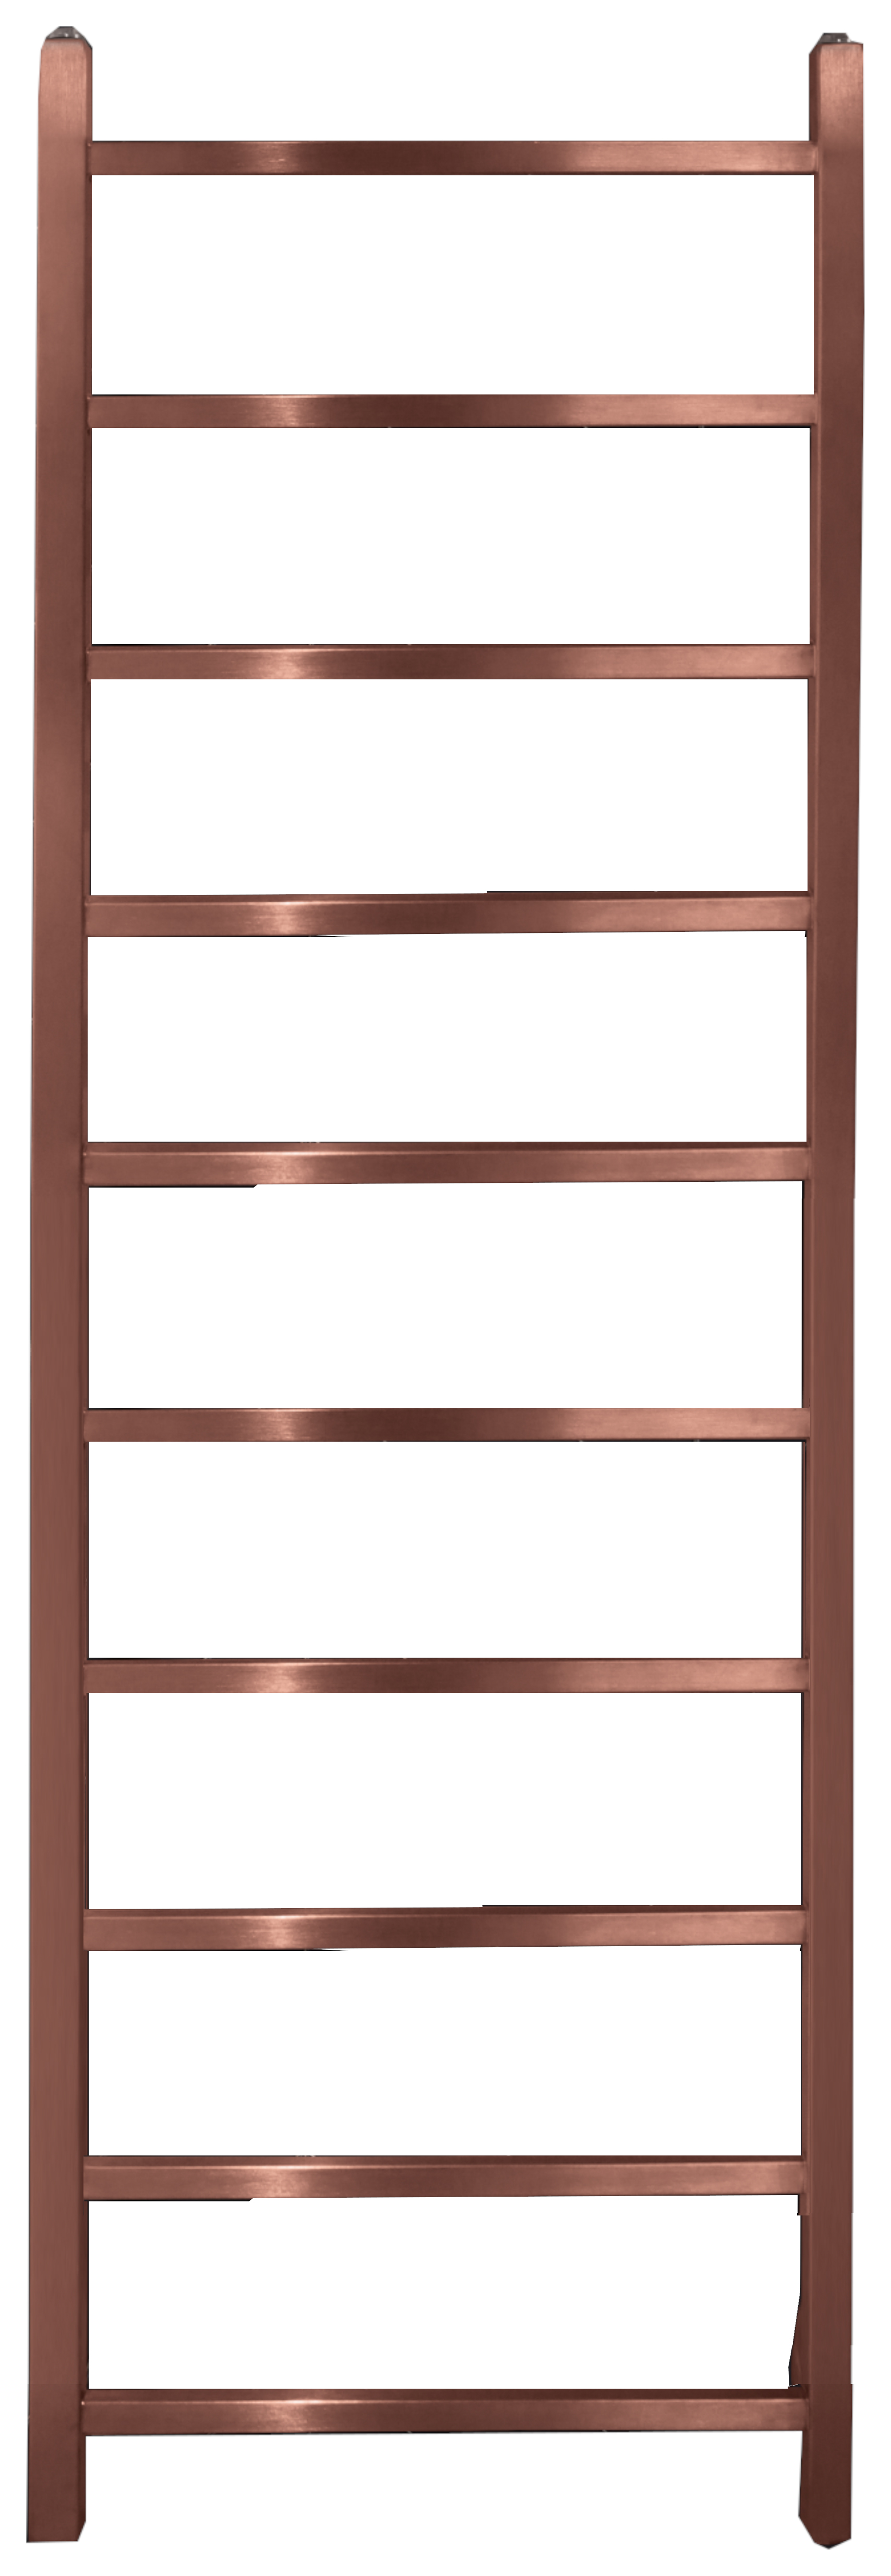 Image of Towelrads Diva Rose Gold Dry Electric Non Thermostatic Towel Radiator - 1500 x 500mm